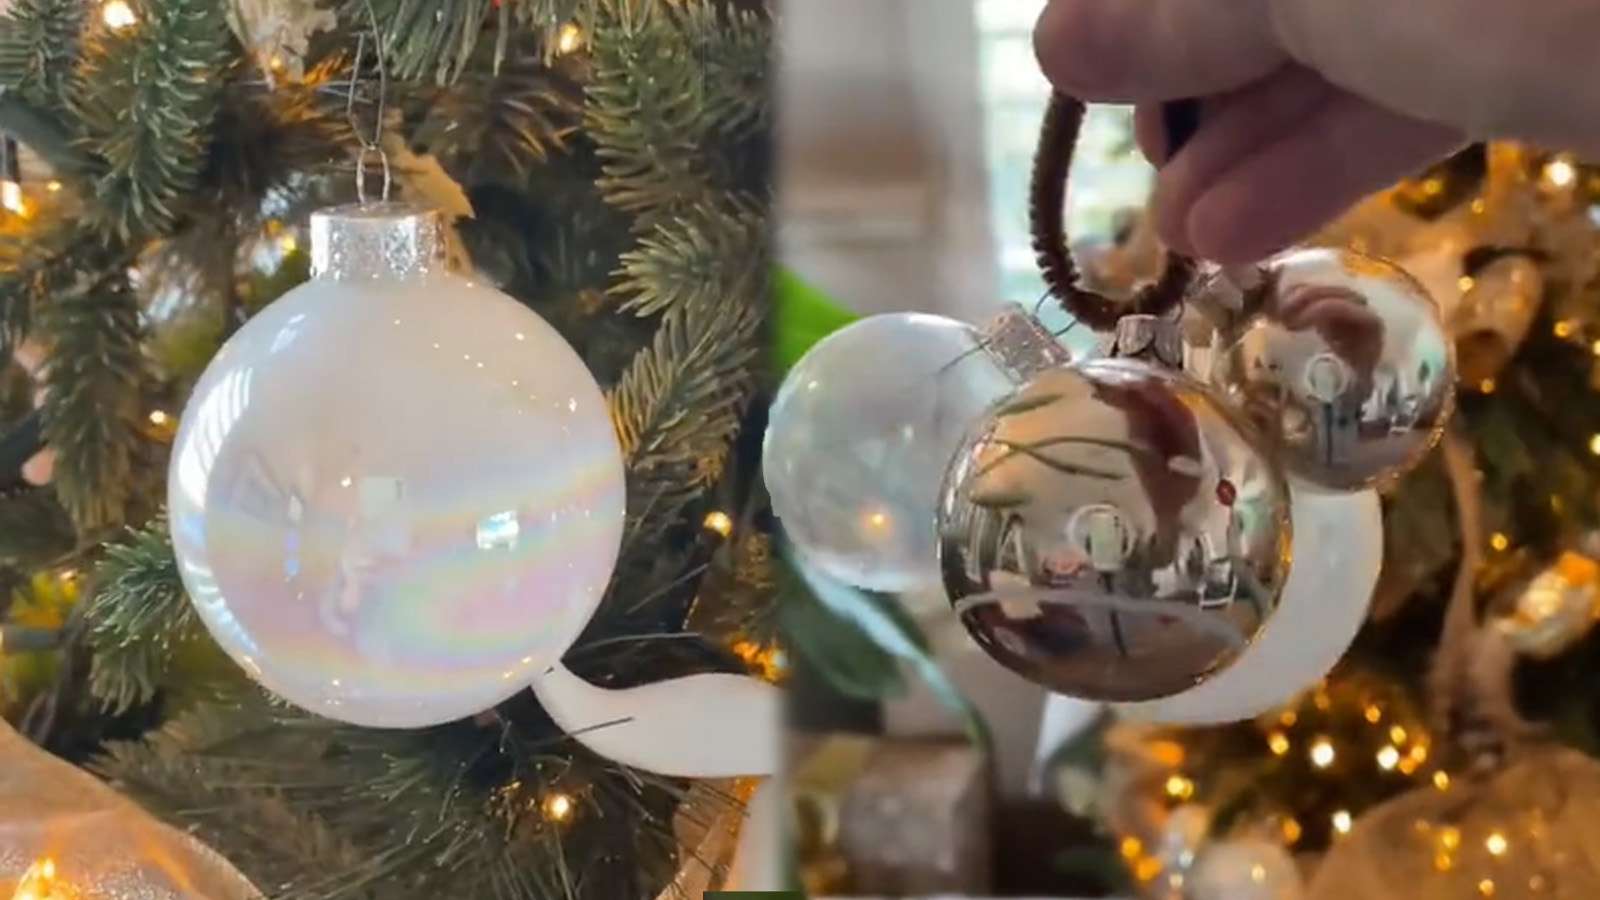 Wild Christmas tree hack adds extra sparkle to hanging ornaments